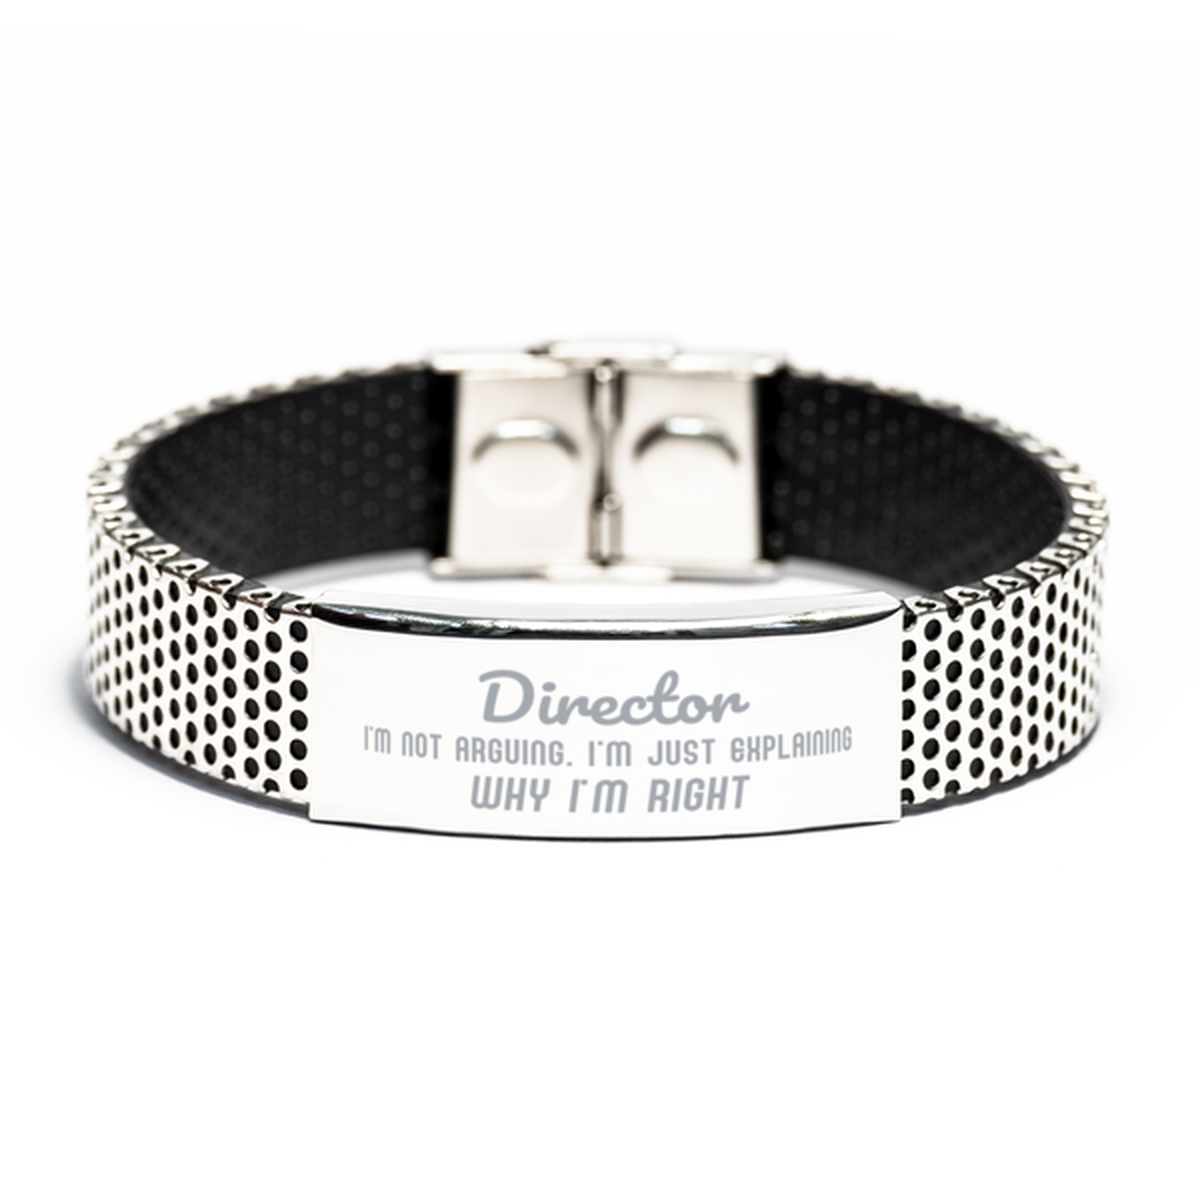 Director I'm not Arguing. I'm Just Explaining Why I'm RIGHT Stainless Steel Bracelet, Funny Saying Quote Director Gifts For Director Graduation Birthday Christmas Gifts for Men Women Coworker